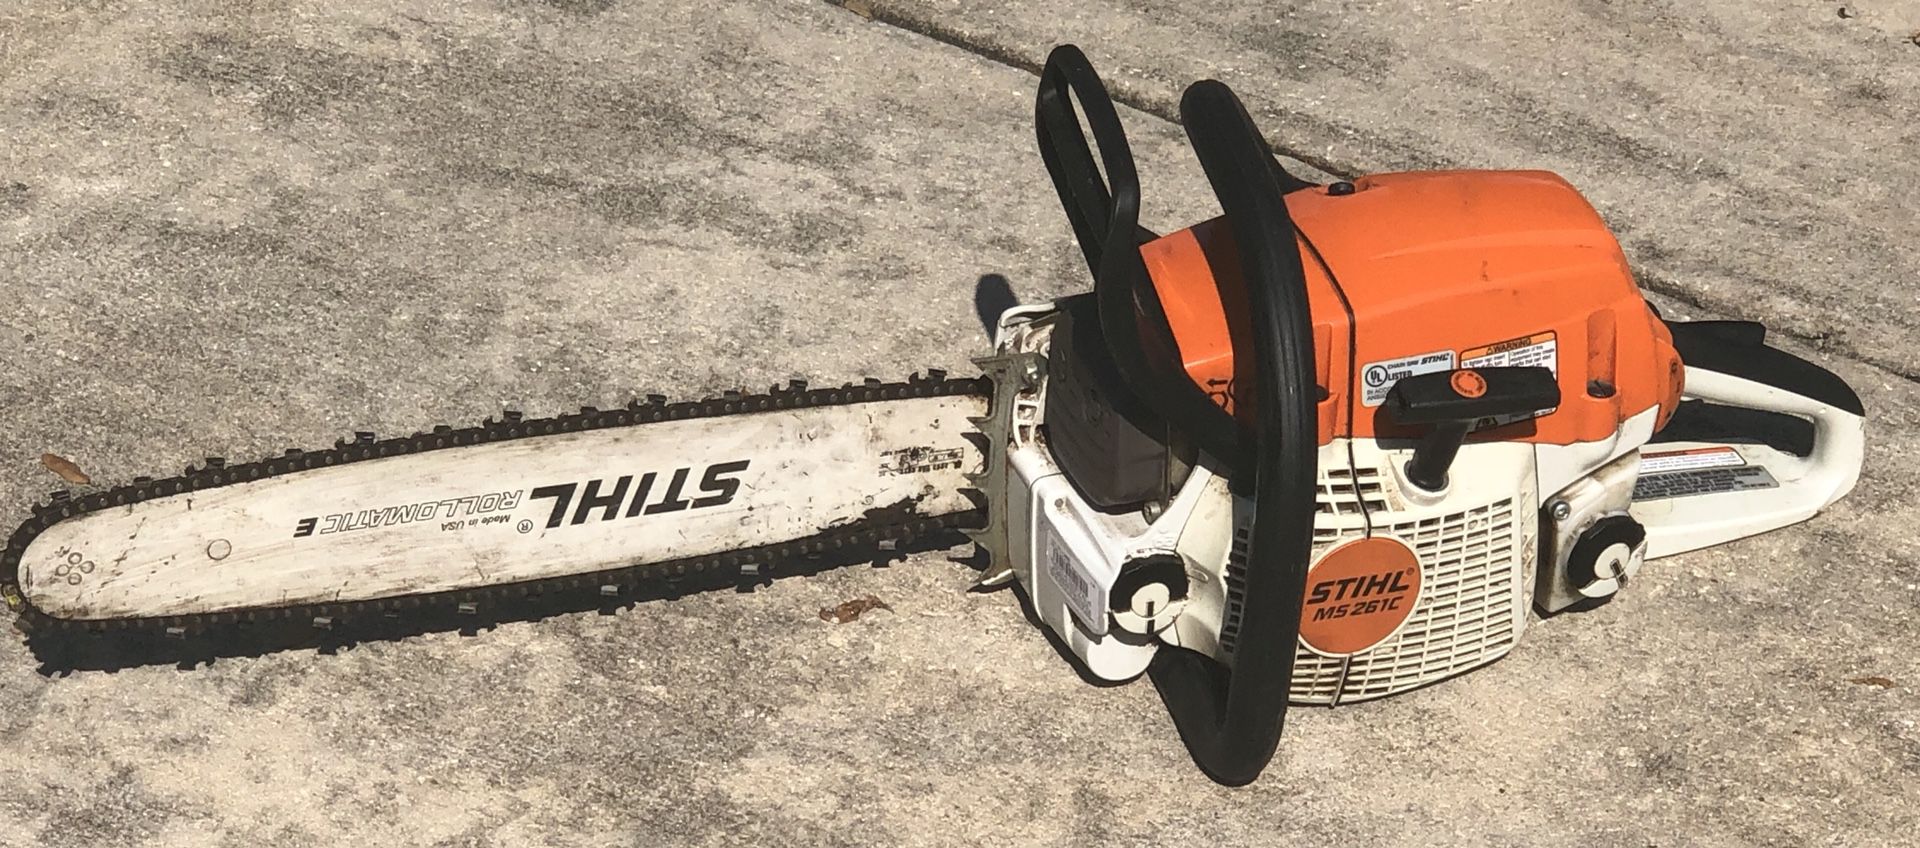 Stihl MS261C Chainsaw Great Condition 20” Bar